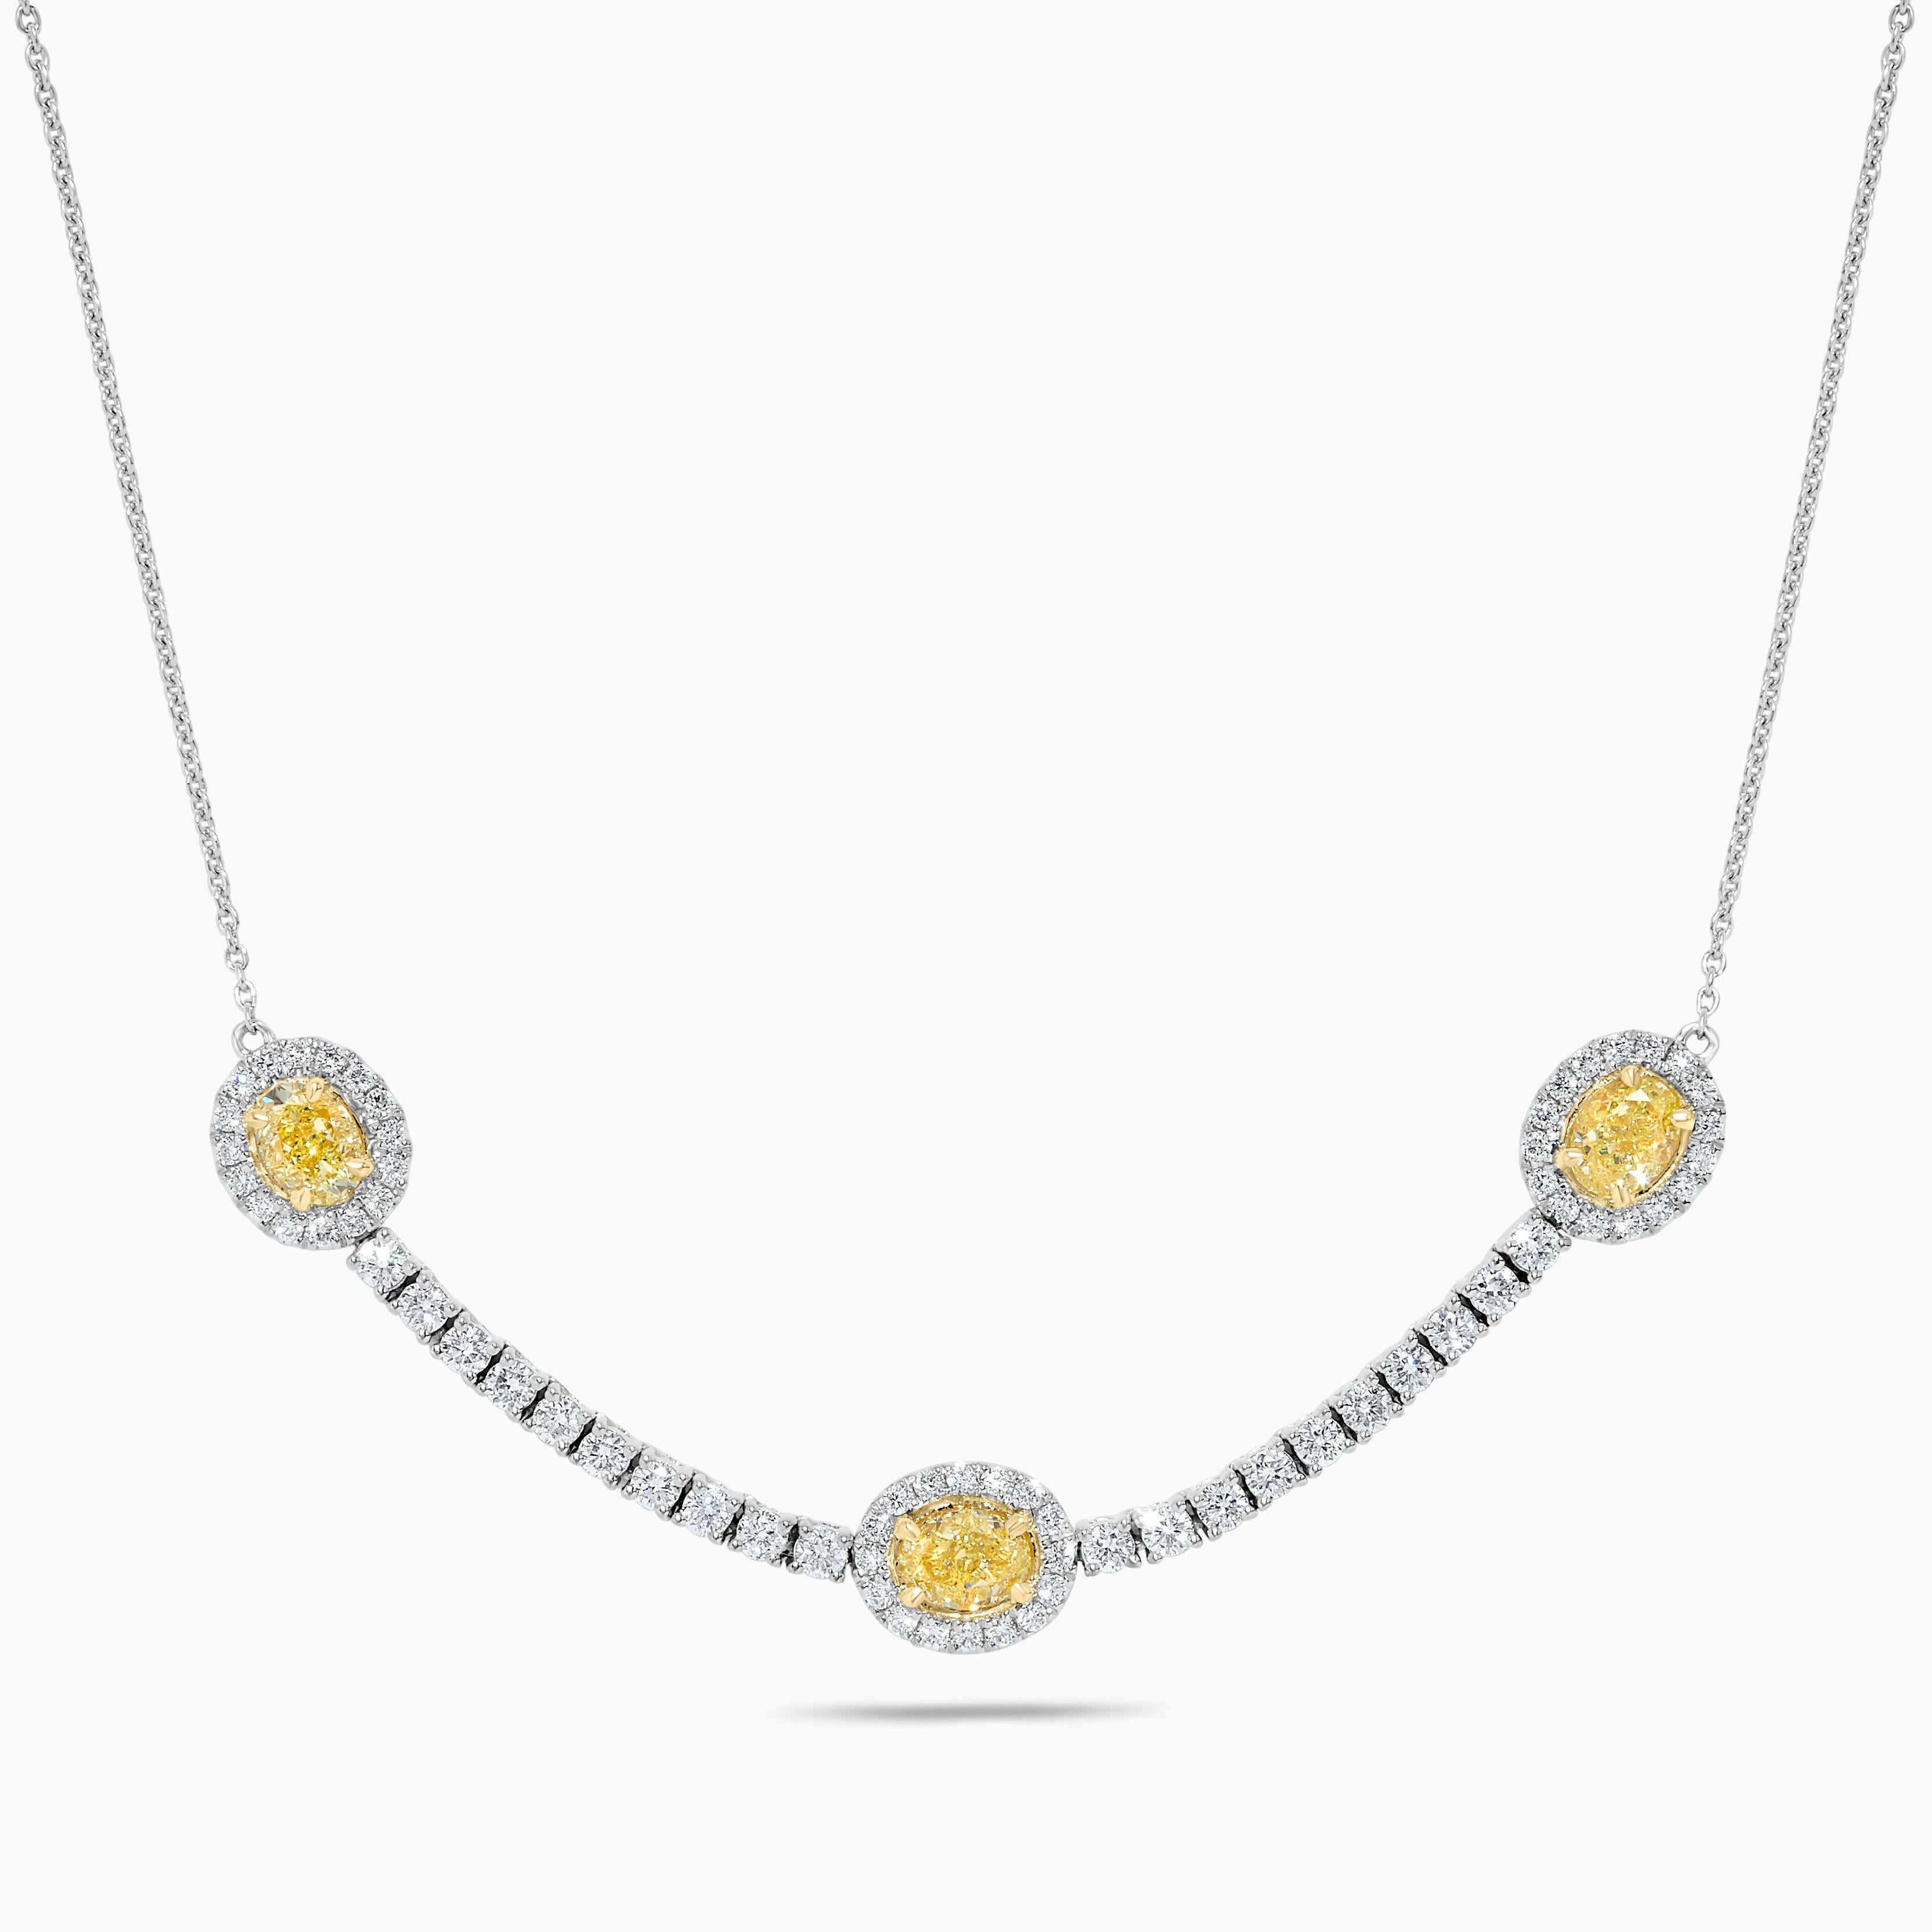 RareGemWorld's classic diamond necklace. Mounted in a beautiful 18K Yellow and White Gold setting with a natural oval cut yellow diamond. The yellow diamond is surrounded by small round natural white diamond melee as well as diamonds throughout the